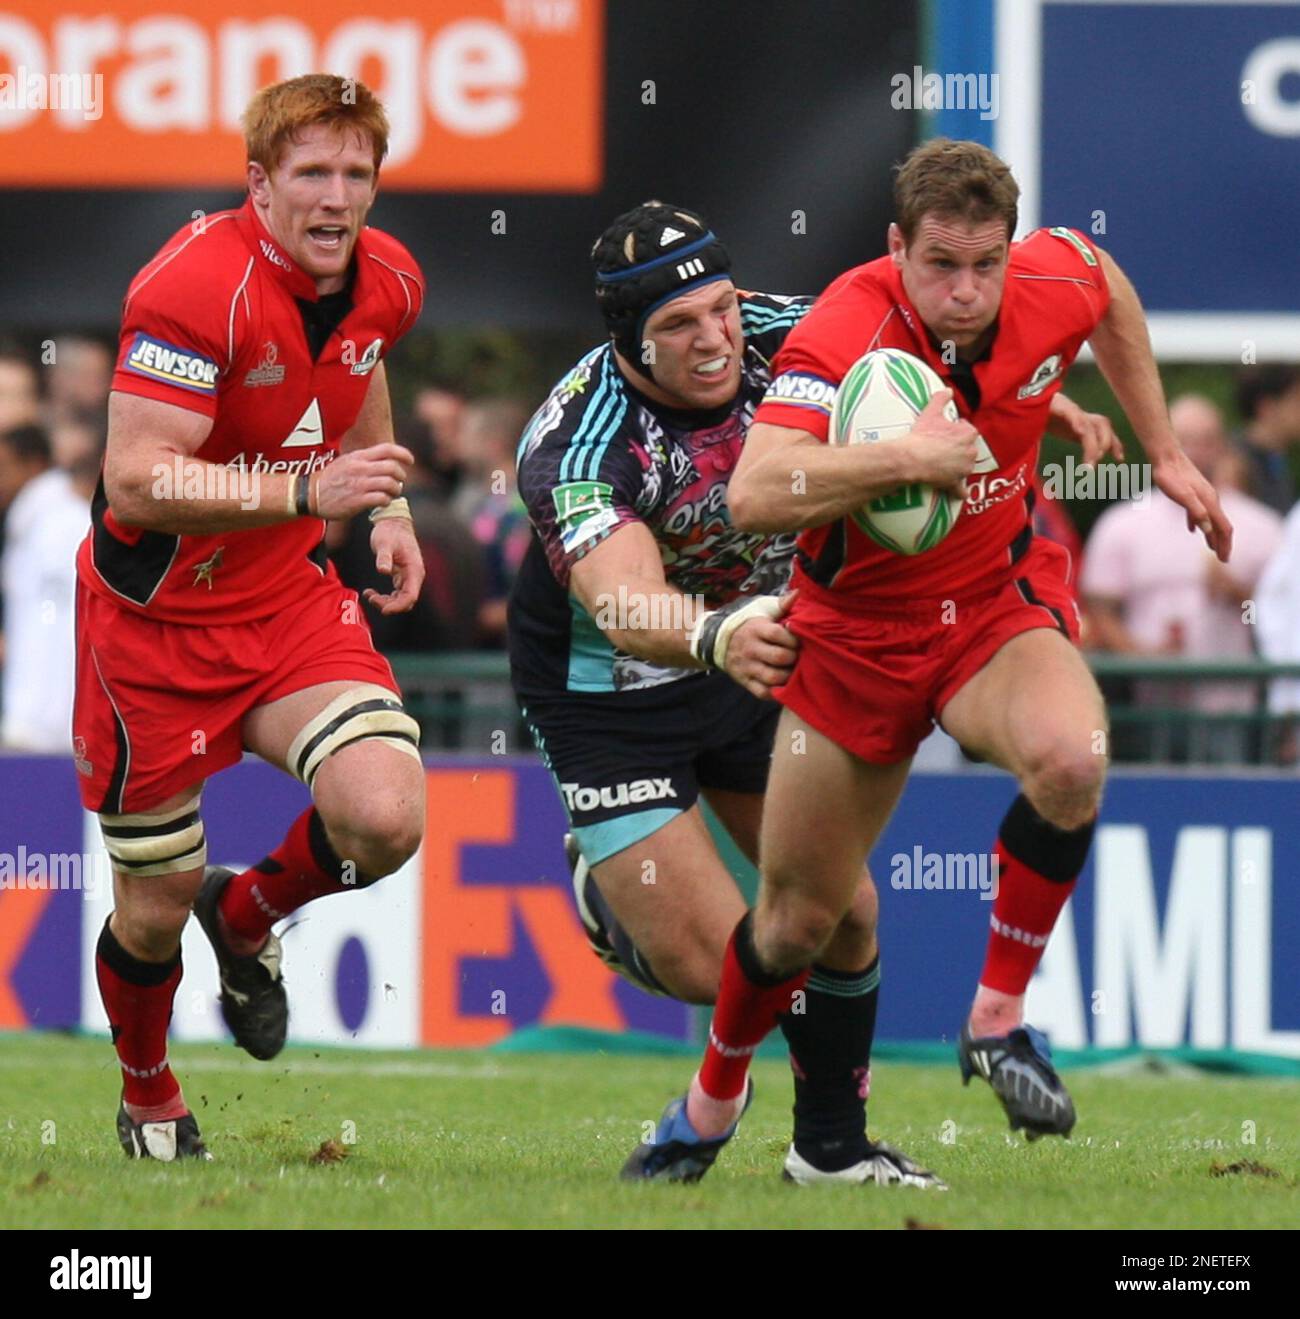 Stade Francais player James Haskell, center, tries to stop an unidentified Edinburgh player during their Heineken European Cup rugby union match in Paris, France, Saturday Oct